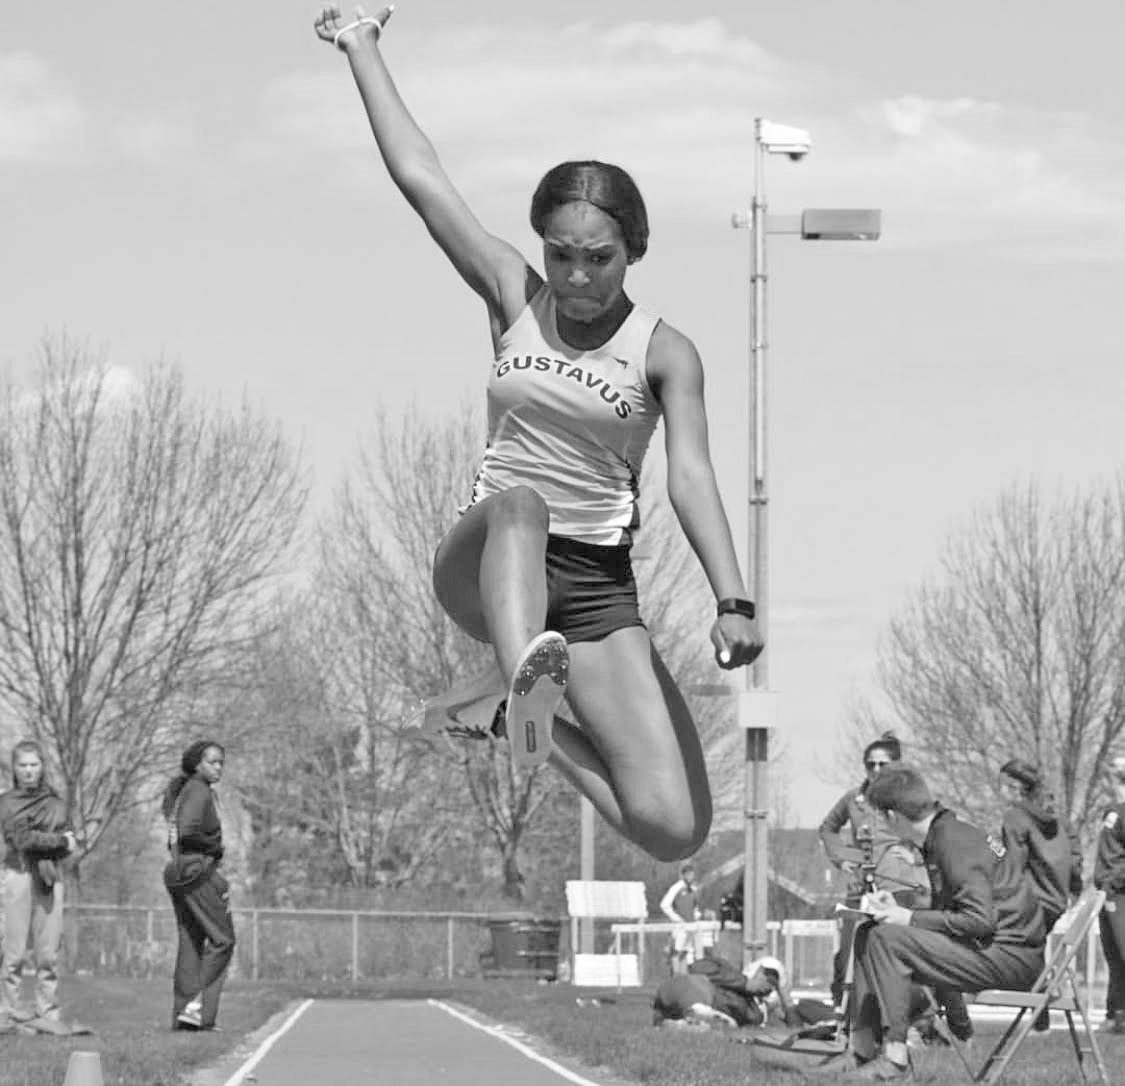 Banks is a member of the track and field team where she partici- pates in long-jump and sprinting events.